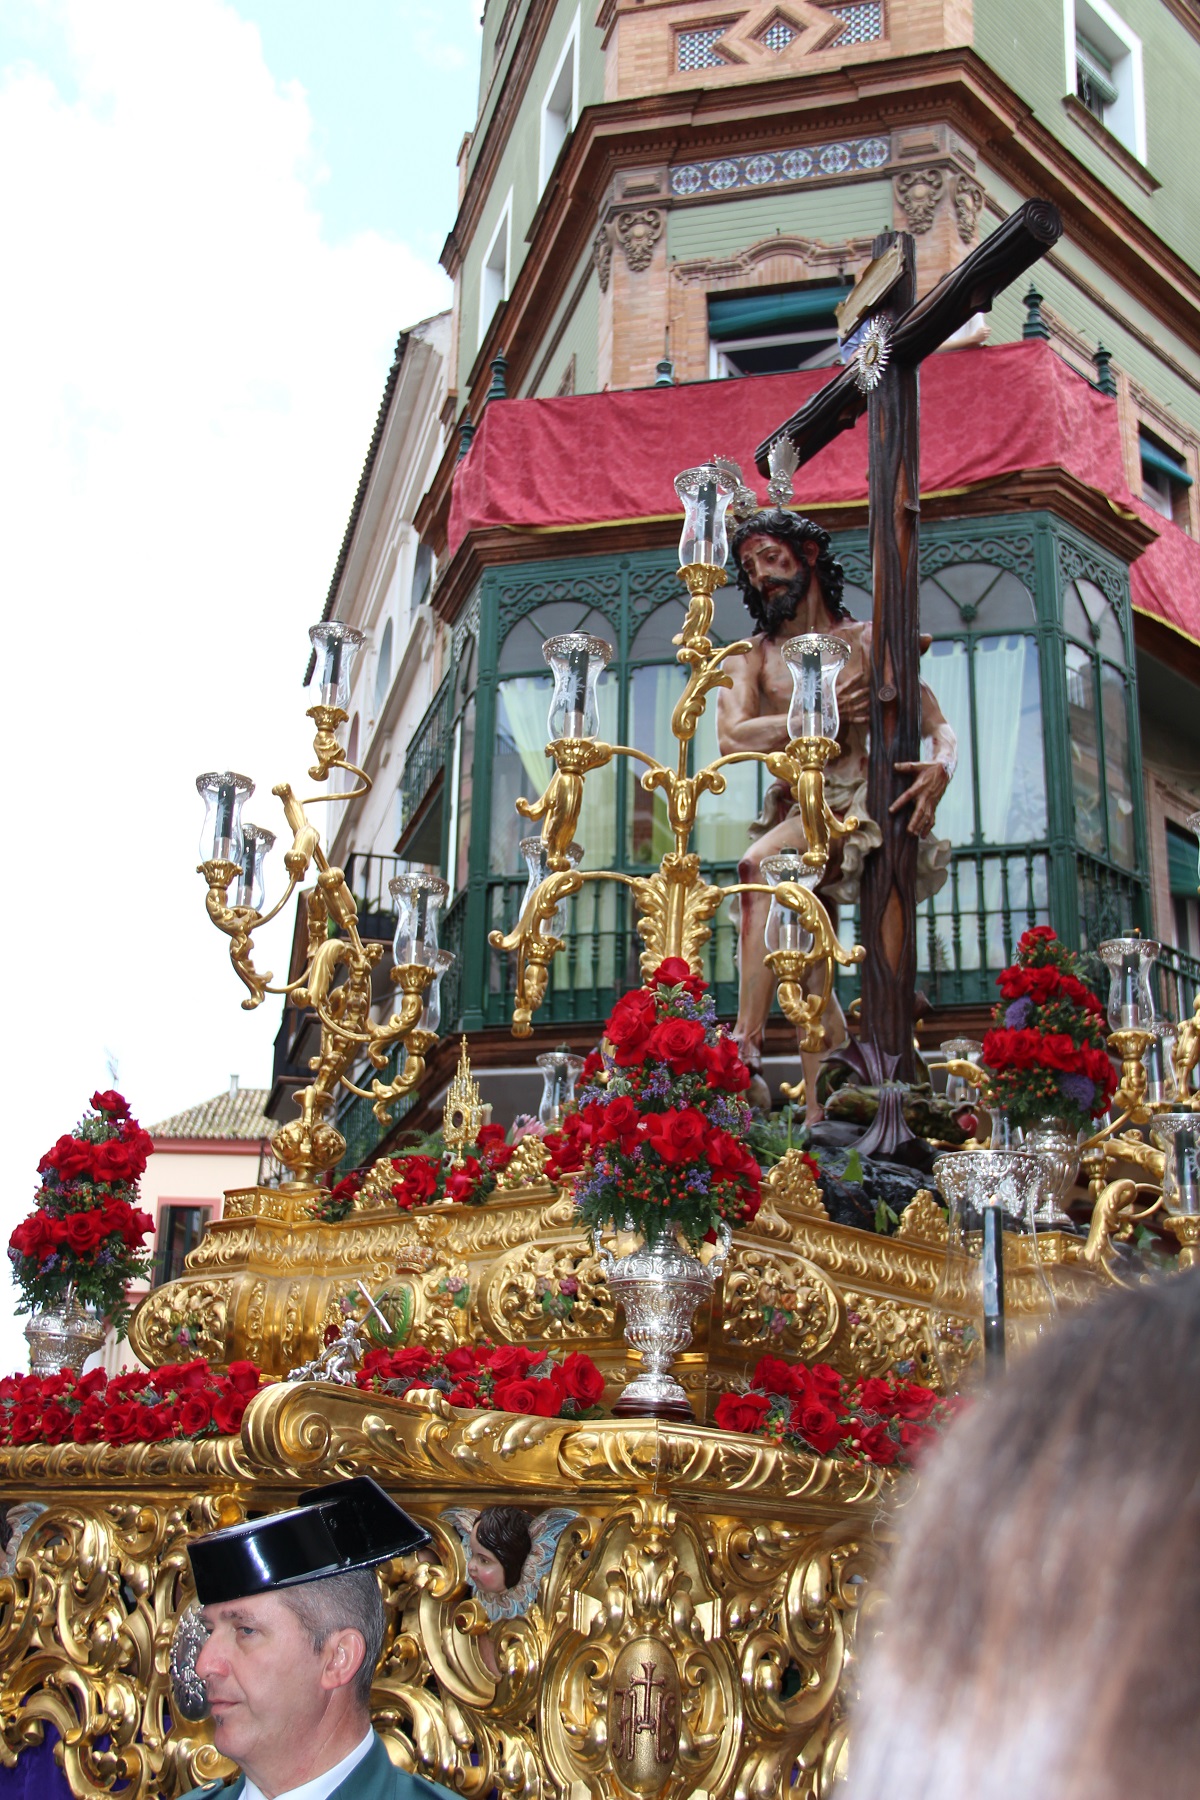 A a gold float with a religious statue of Jesus standing next to the cross carried through the streets of Seville